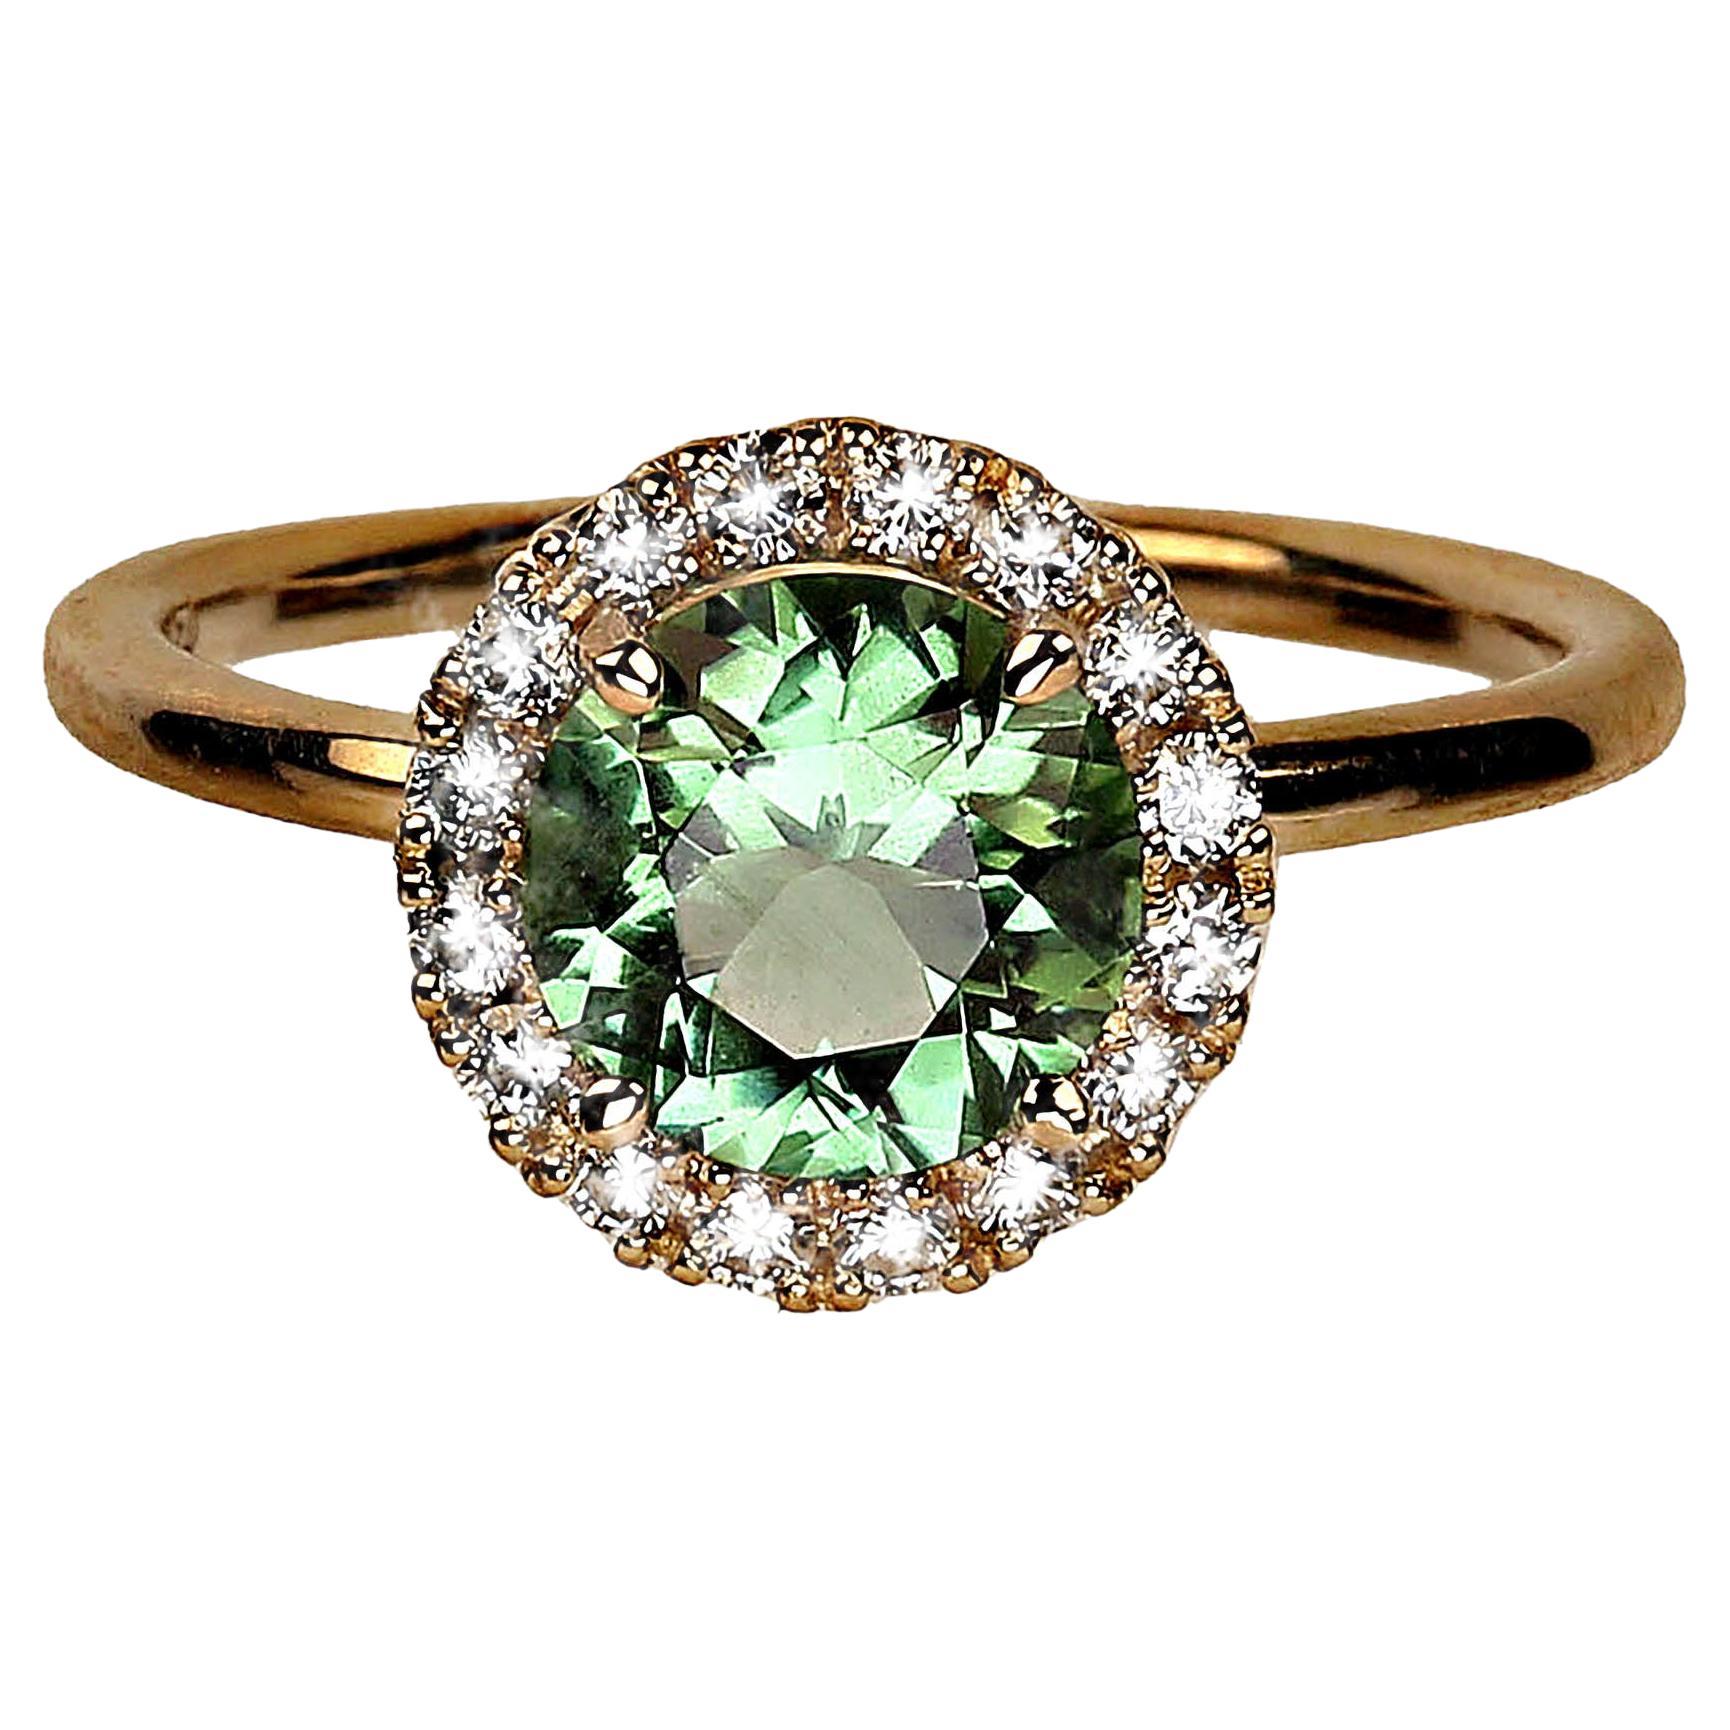 Gorgeous Ring to wear every day.  This beautiful round Brazilian green Tourmaline, 1.2ct,  has come out of the vault after 30 years. It is set in a diamond halo of 0.30ct to complement its distinctive Brazilian green with just a hint of blue color. 